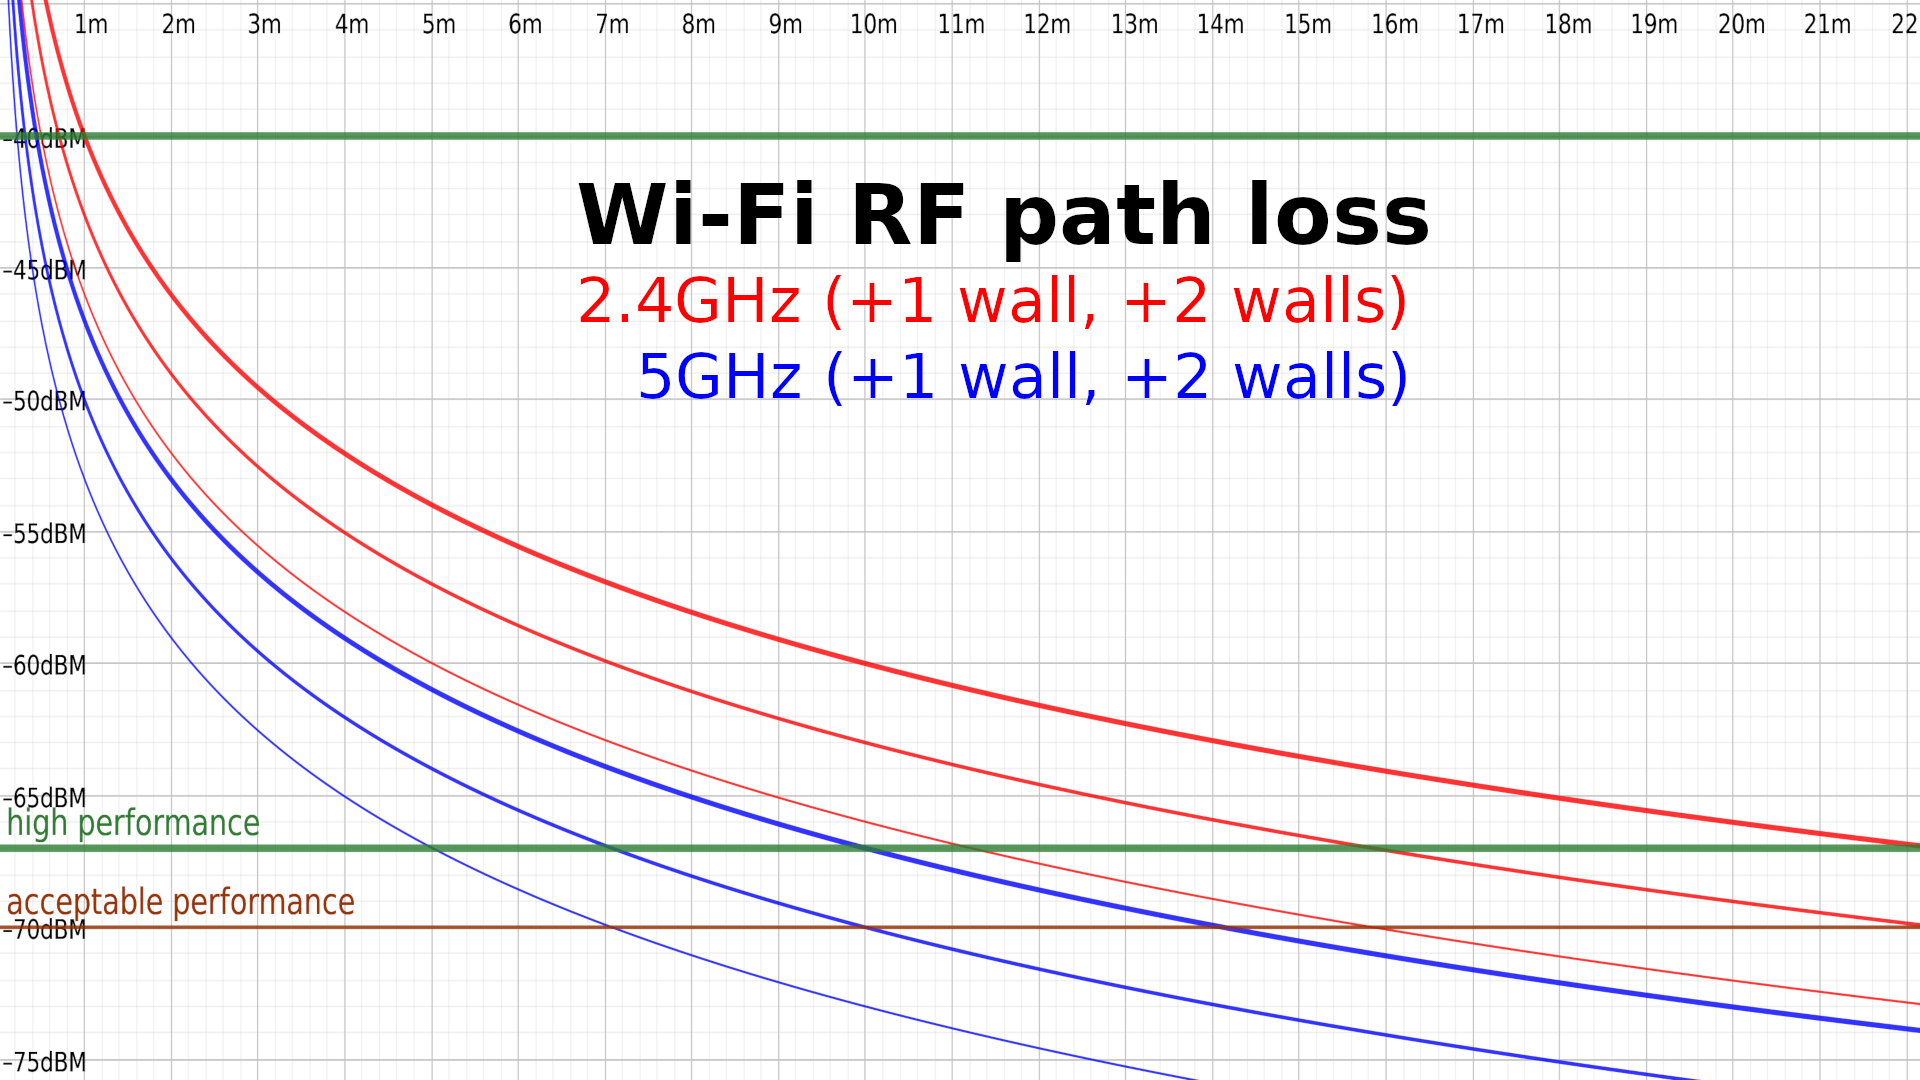 How to improve wireless network signal range and strength